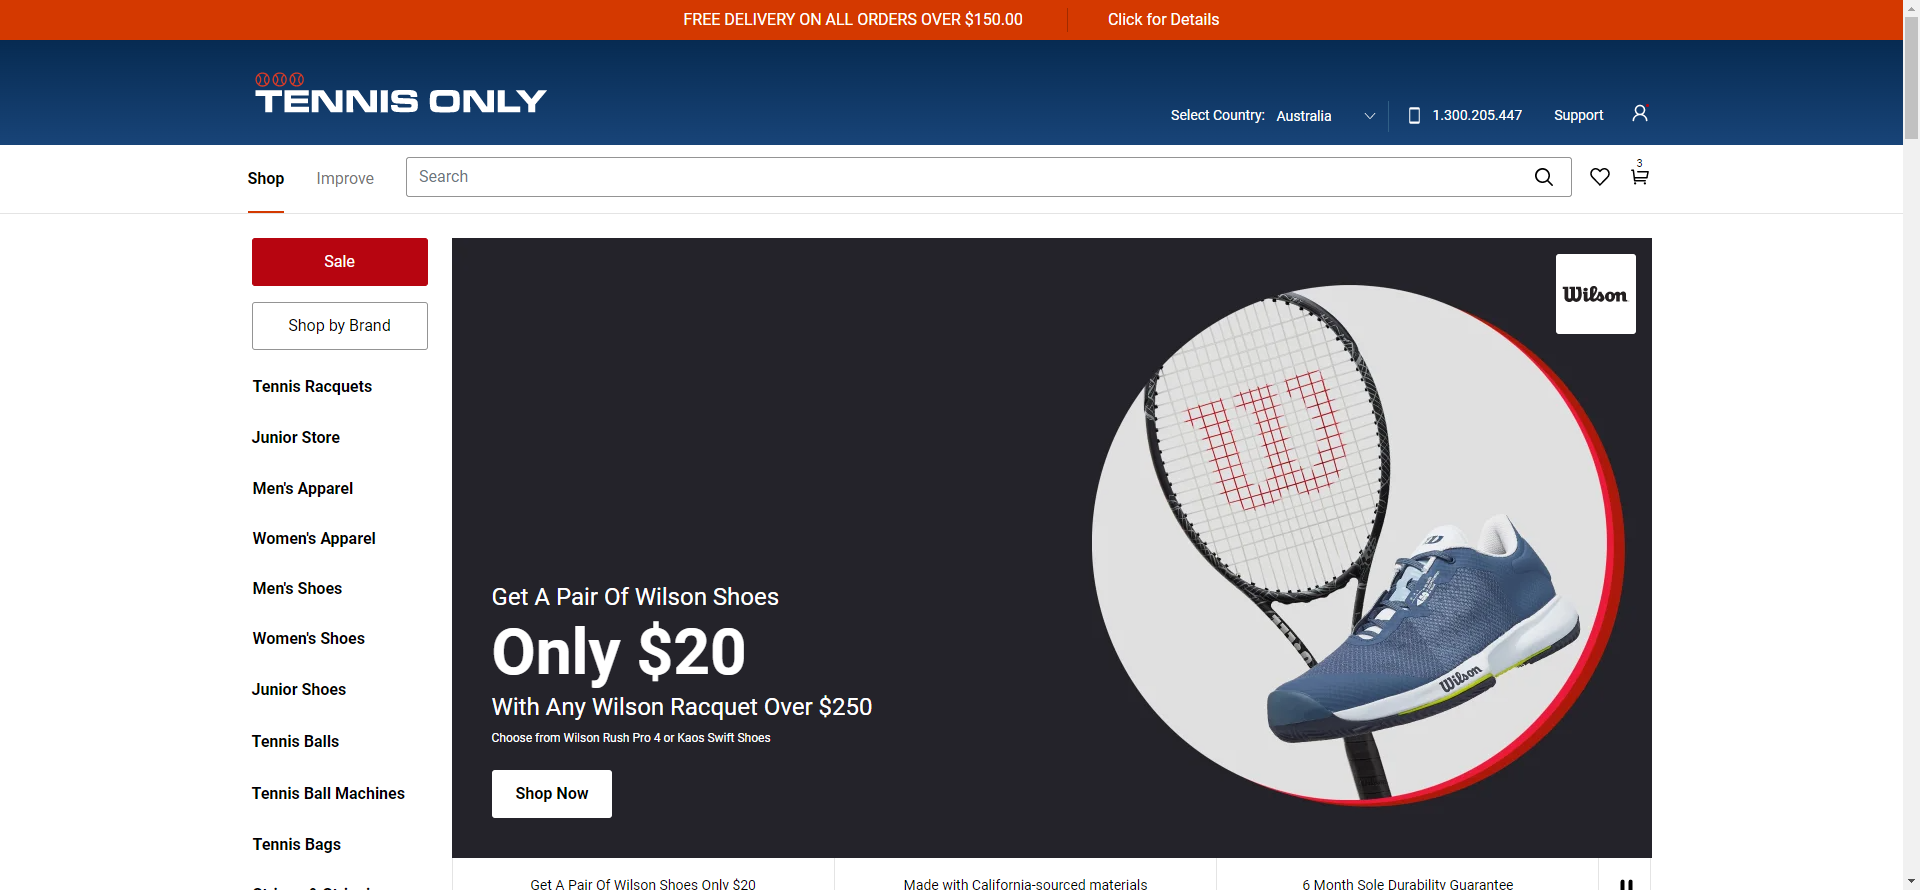 Get a pair of Wilson tennis shoes for only $20 with any Wilson racquet over $250 @ Tennis only